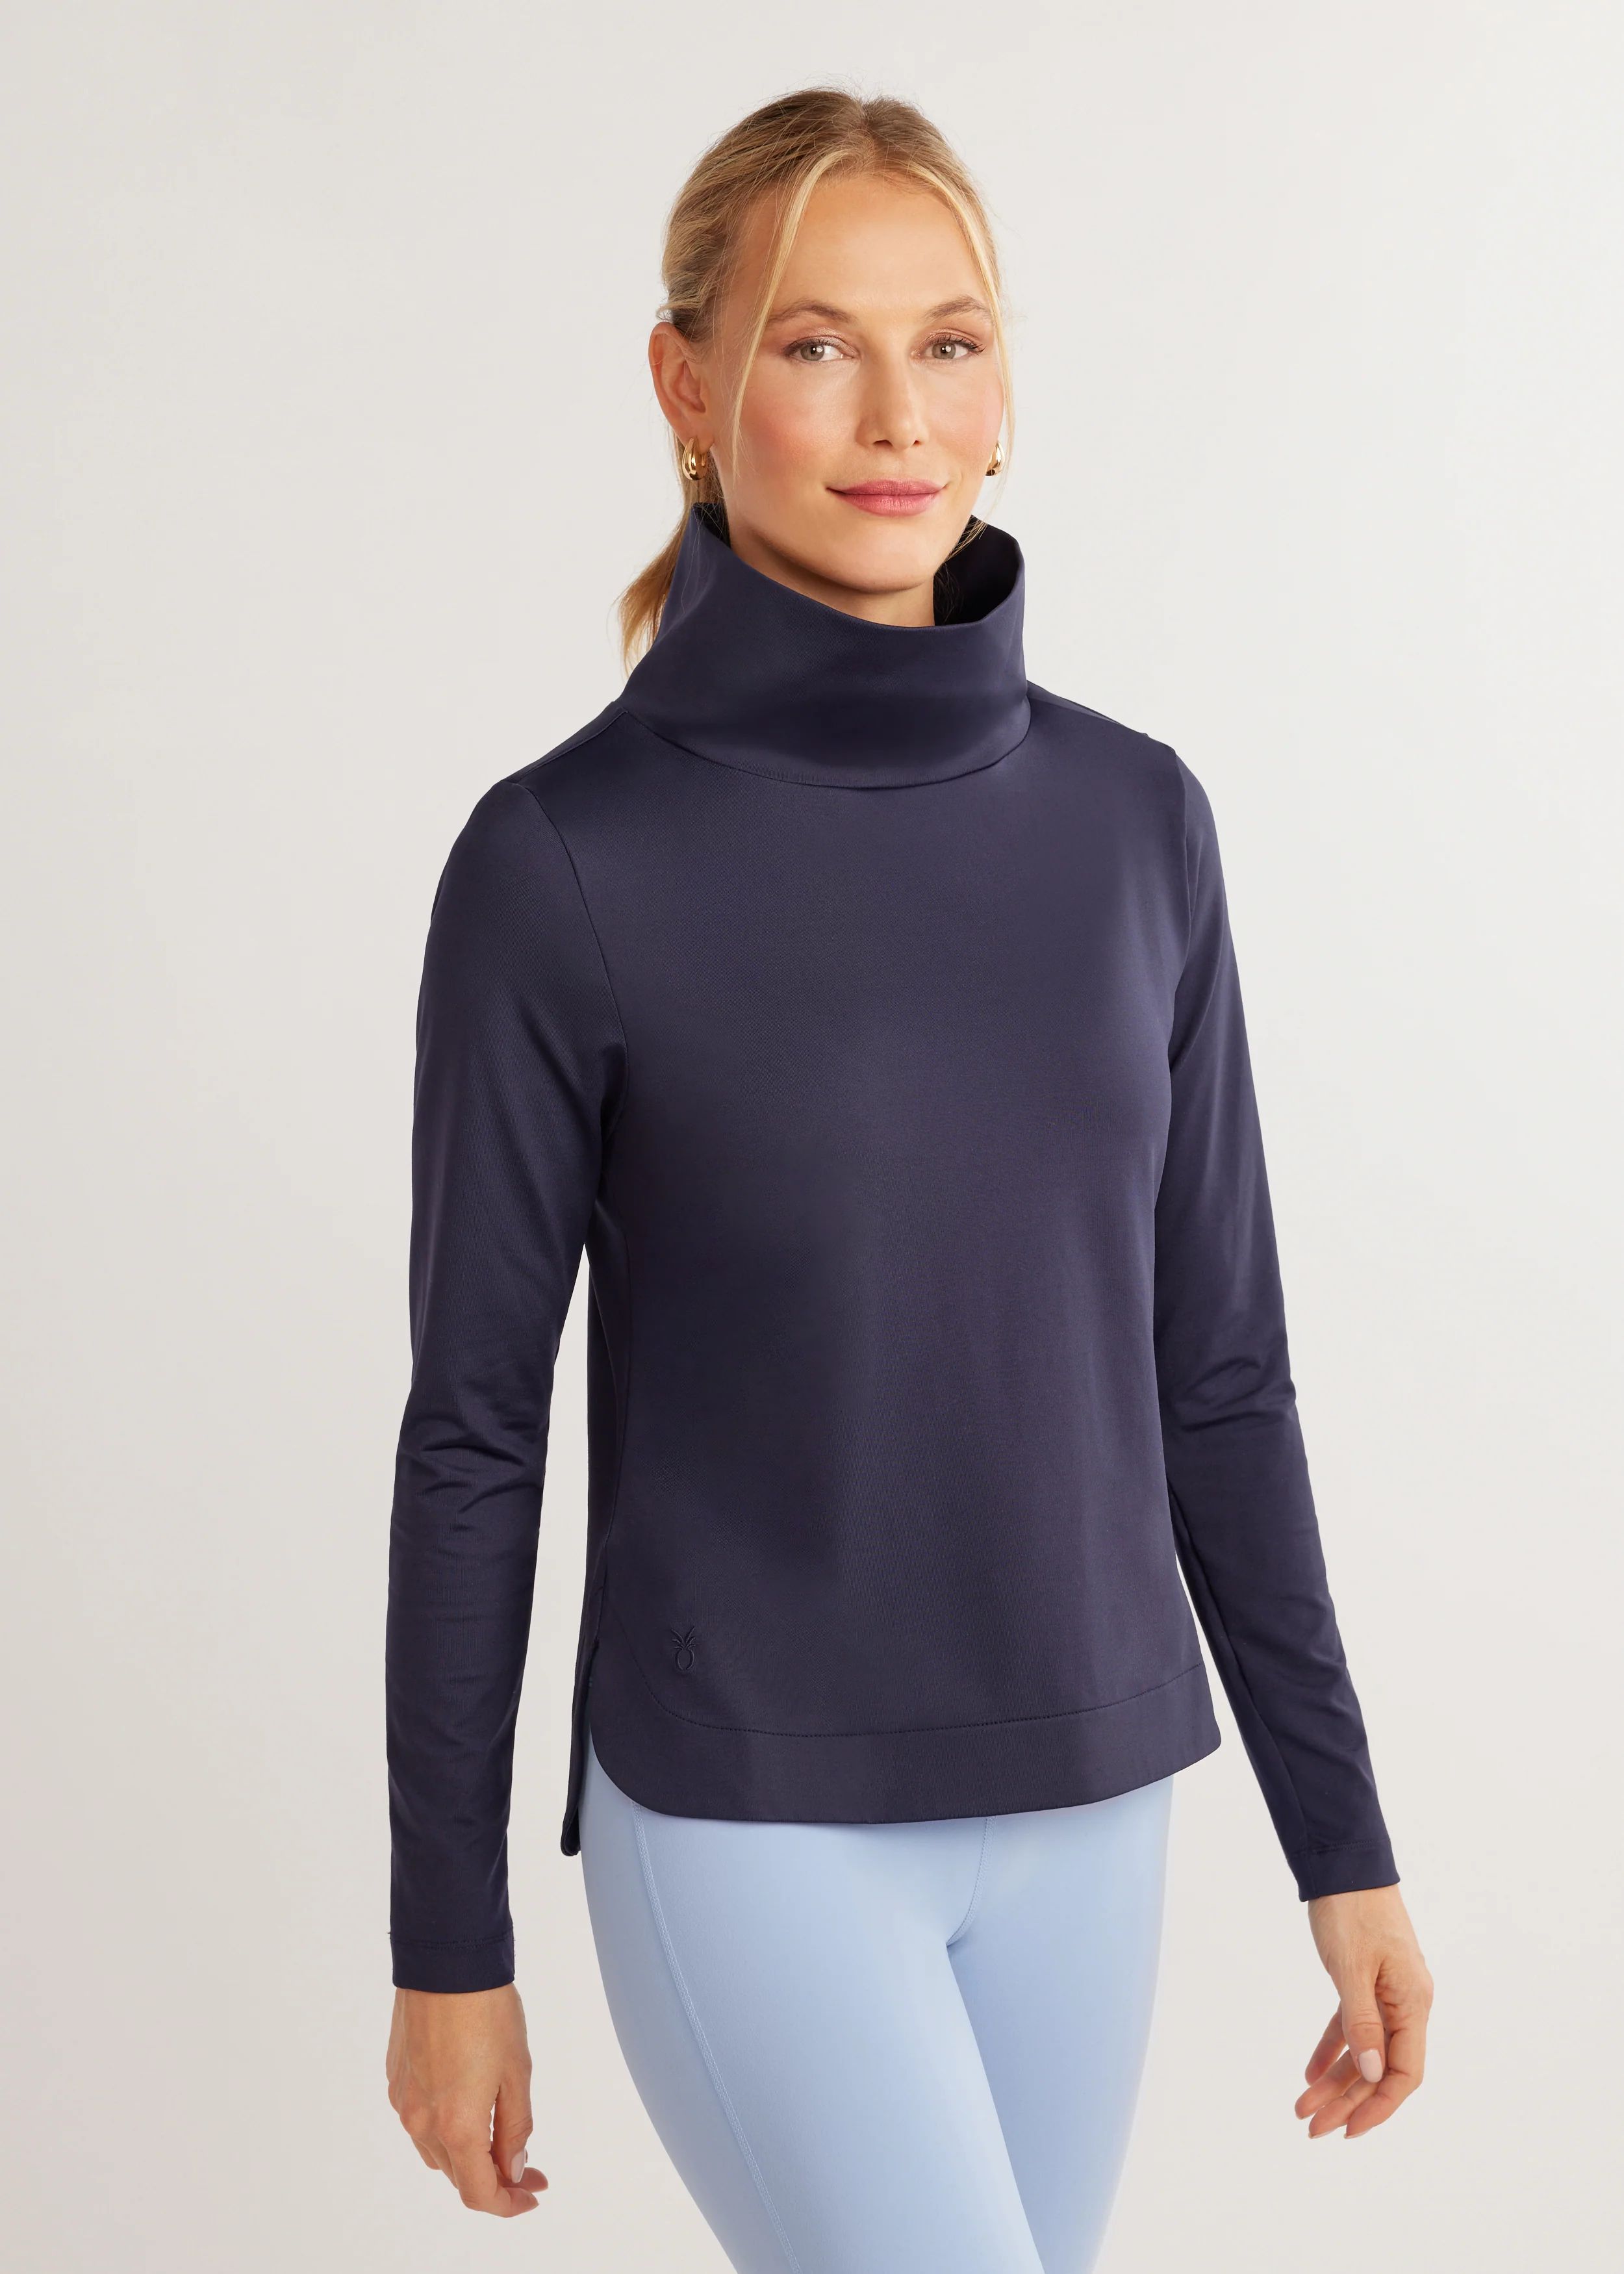 Summit Turtleneck in Repreve® Stretch (Navy) | Dudley Stephens